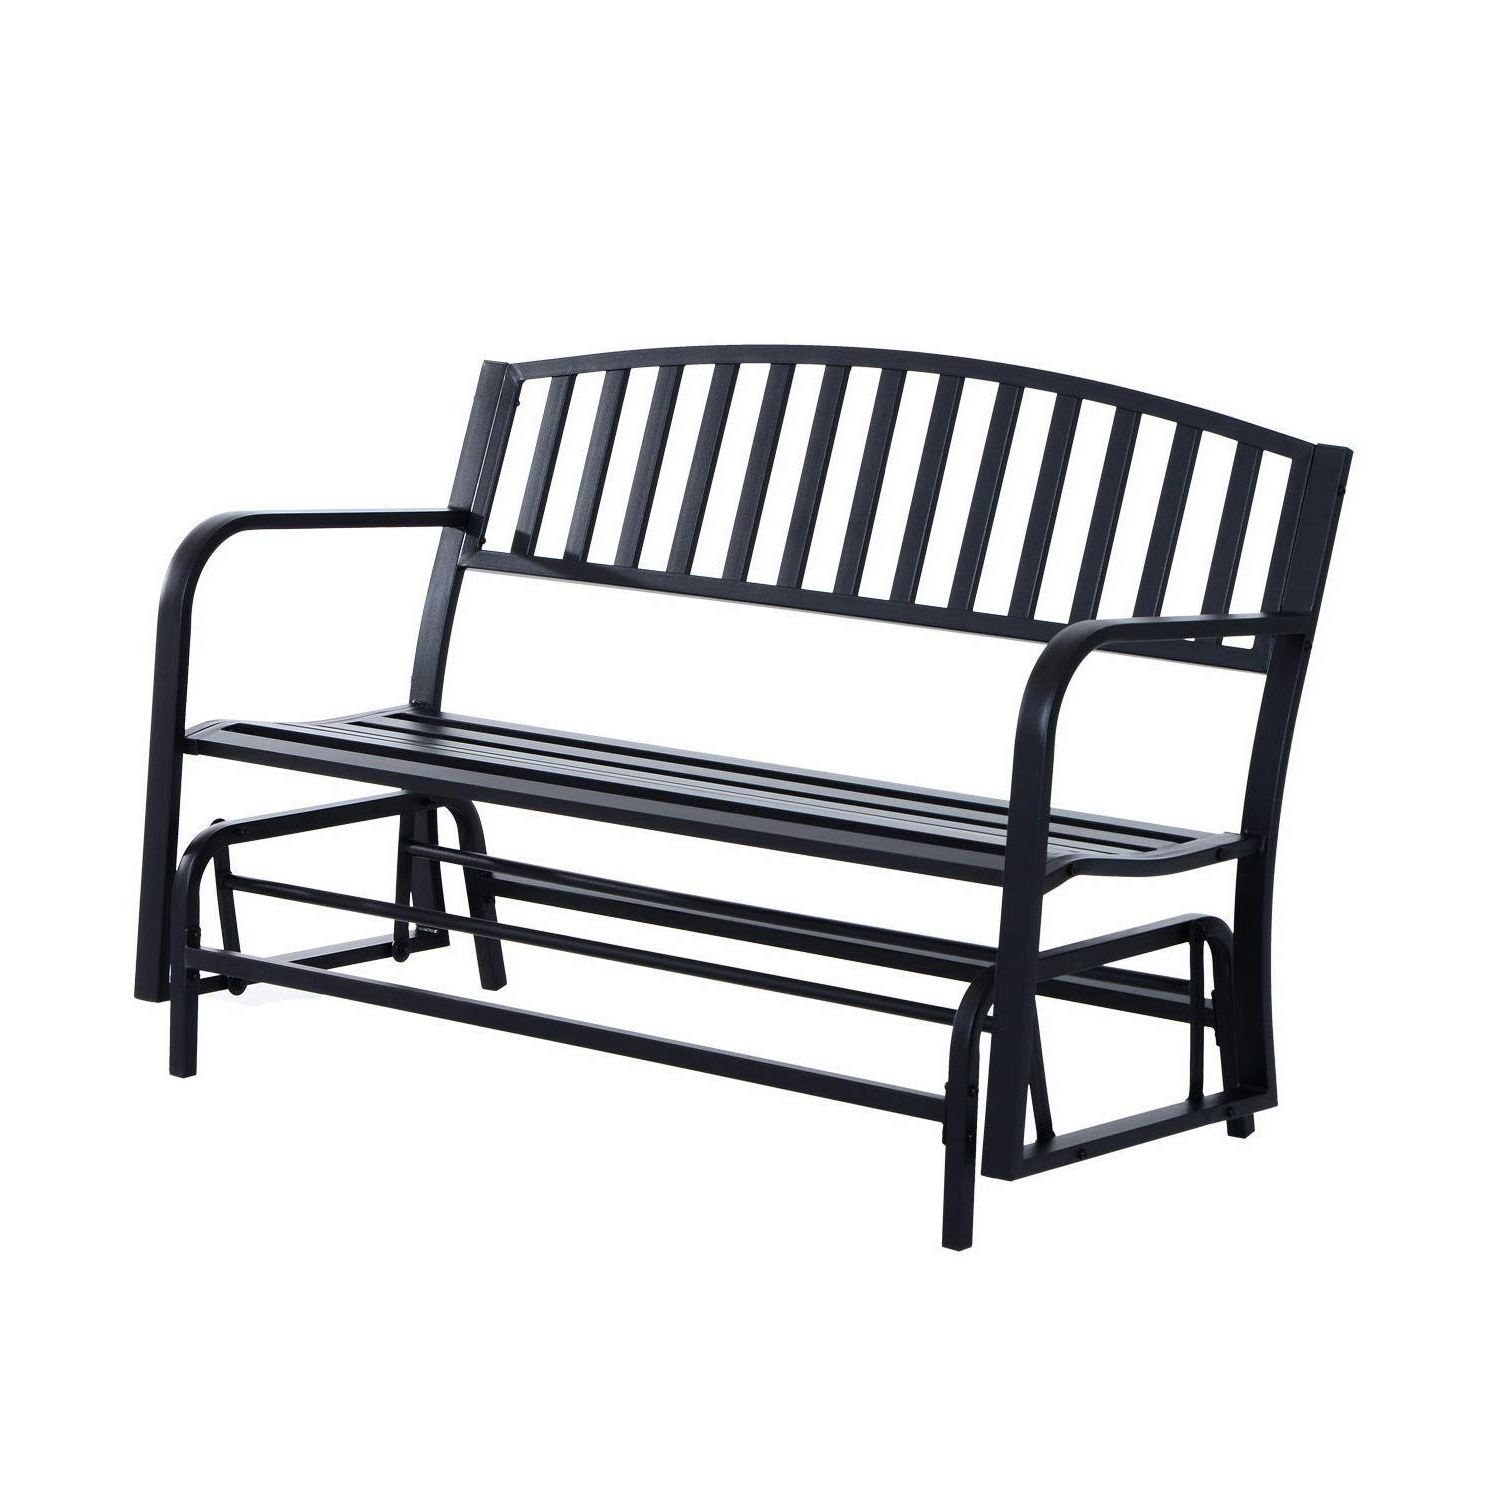 Amazon : Black Patio Swing Glider Bench For 2 Persons With Fashionable Loveseat Glider Benches (View 8 of 30)